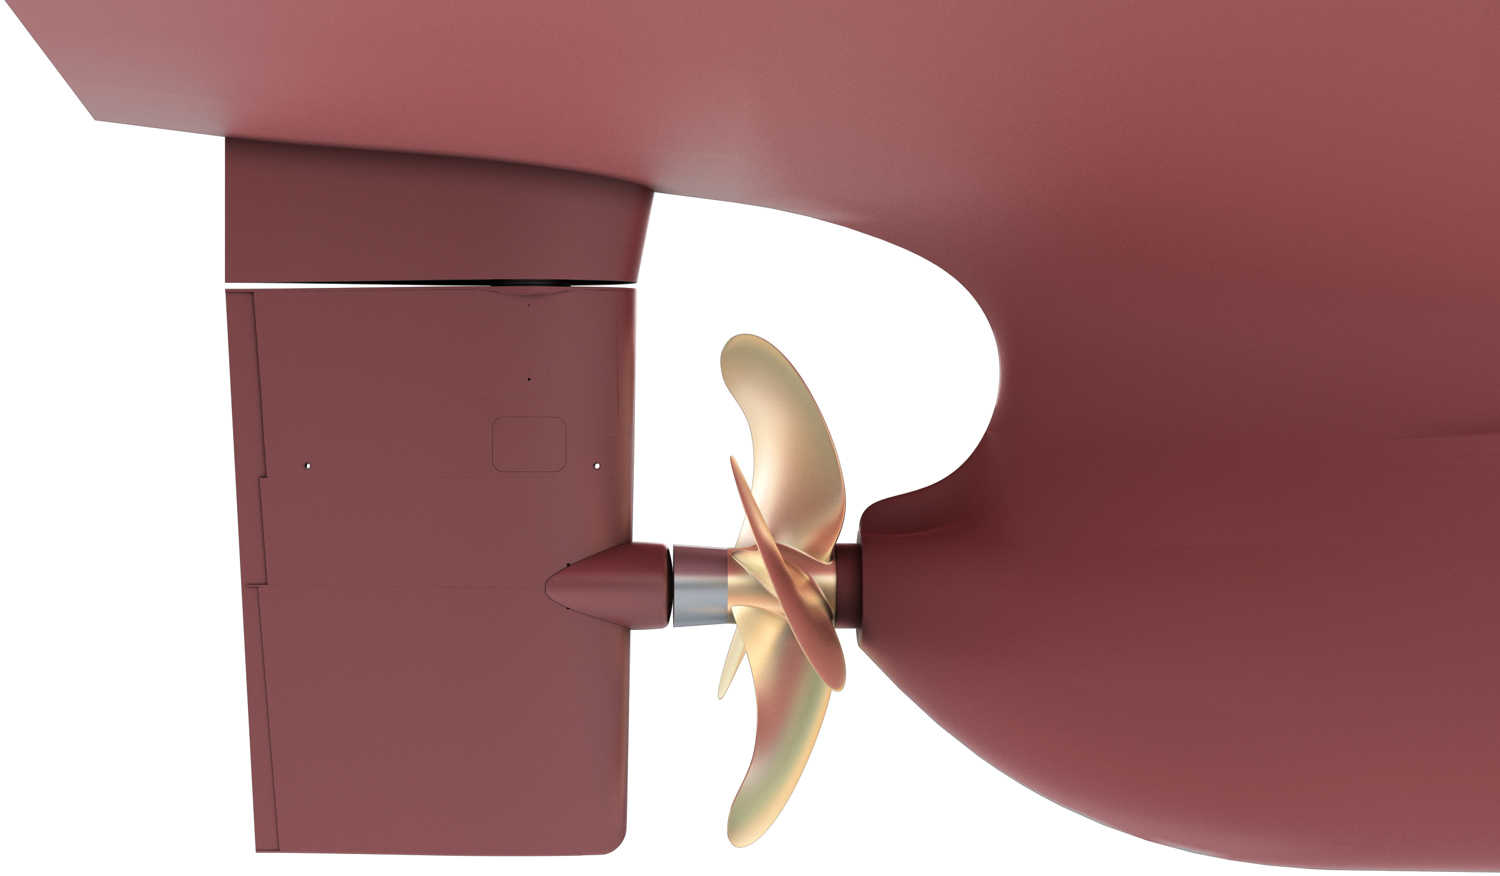 A rendering of the Promas propeller and rudder system in profile